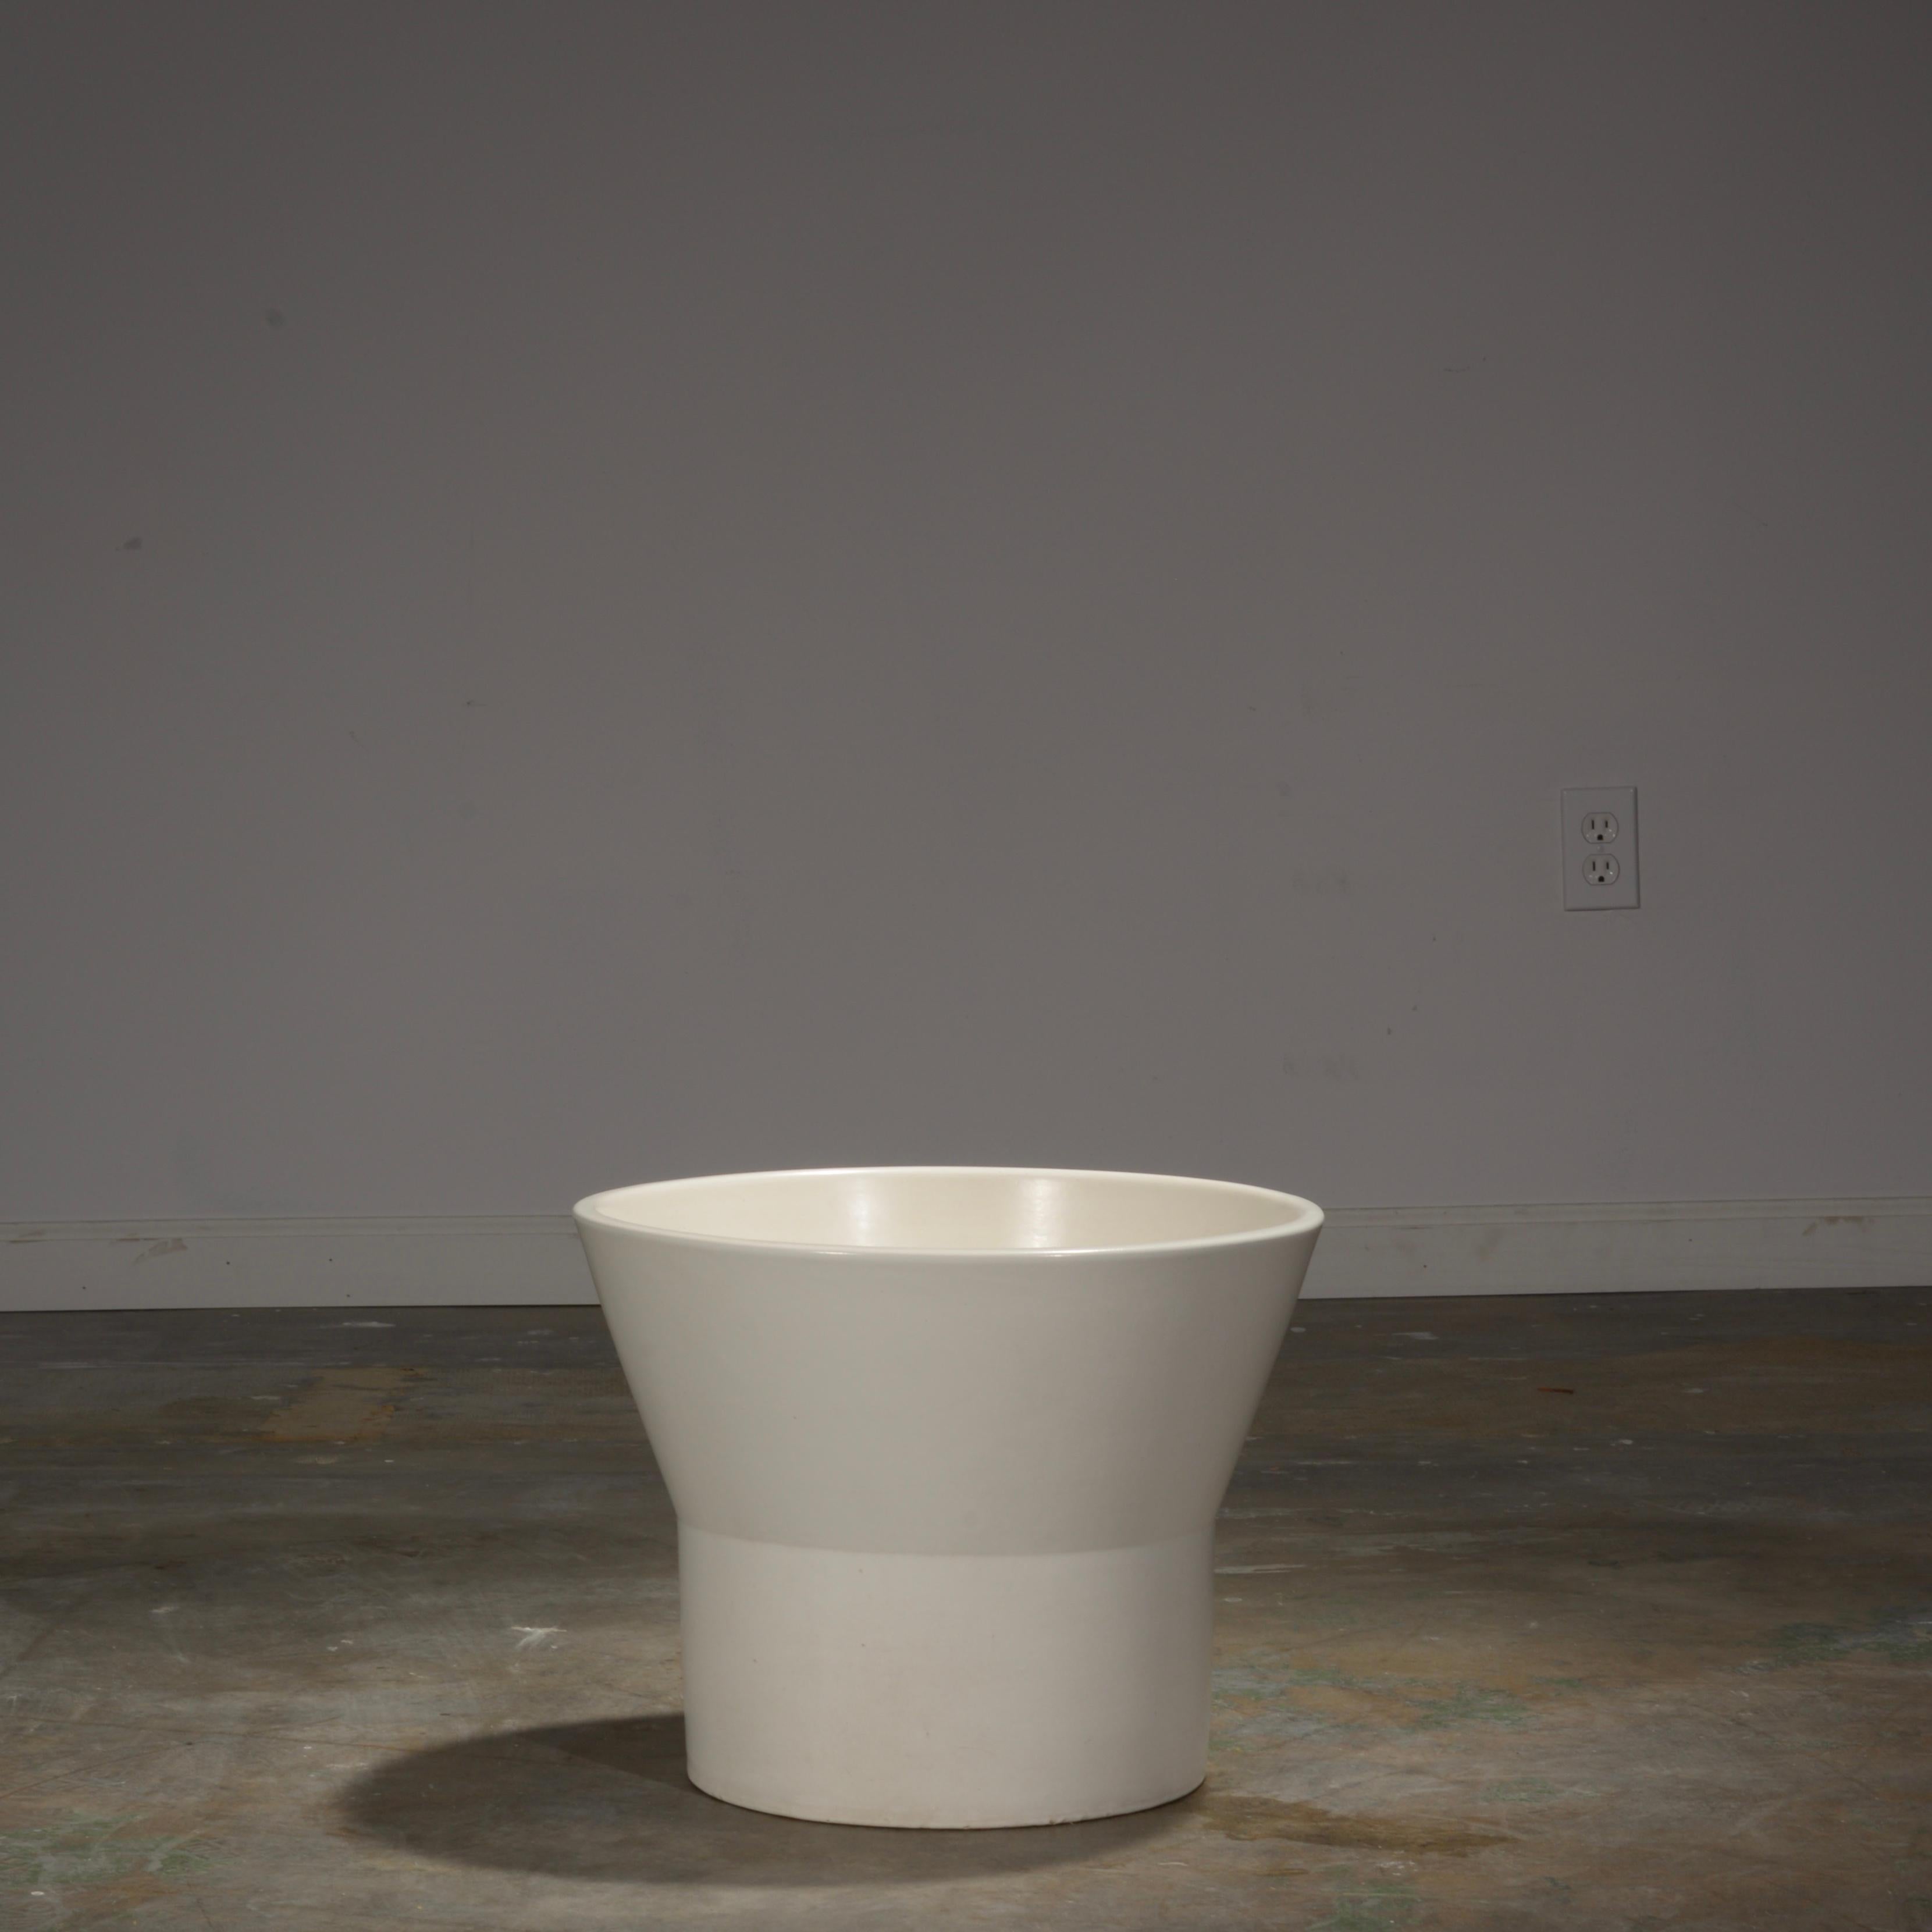 Paul Mccobb for Architectural Pottery White M-2 Planter, 1964 For Sale 1